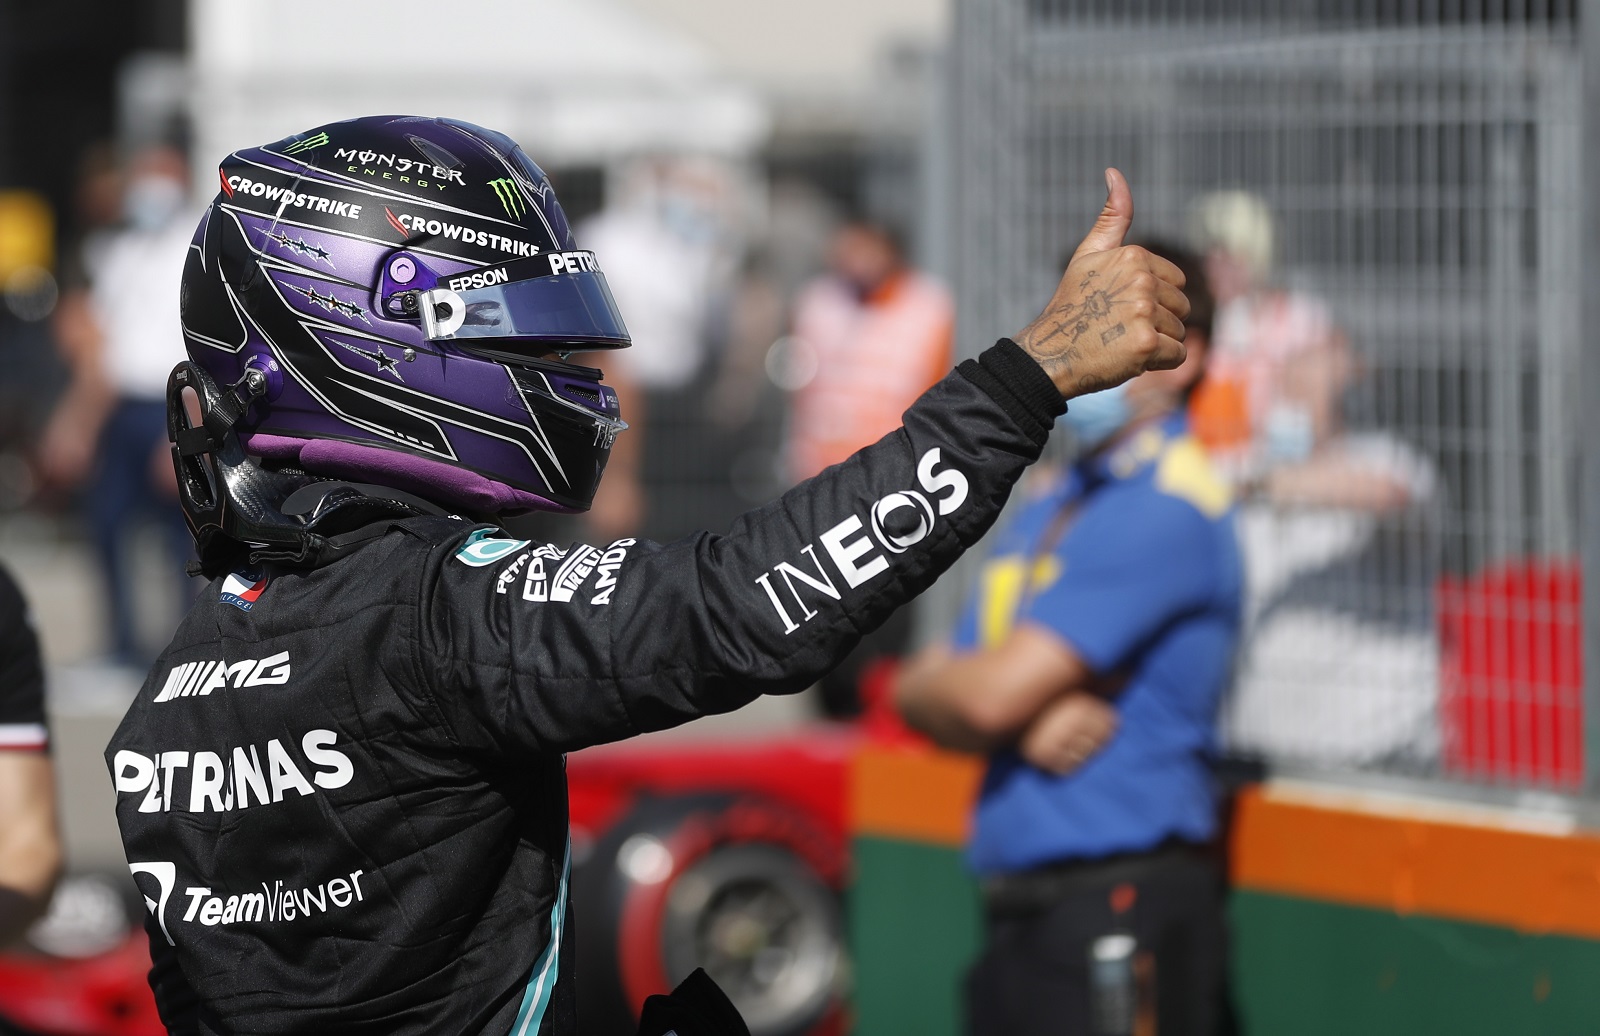 epa09383010 British Formula One driver Lewis Hamilton of Mercedes-AMG Petronas reacts at parc ferme after taking the pole position in the qualifying session of Formula One Grand Prix of Hungary at the Hungaroring circuit in Mogyorod, near Budapest, Hungary, 31 July 2021. The Formula One Grand Prix of Hungary will take place on 01 August 2021.  EPA/DAVID W CERNY / POOL